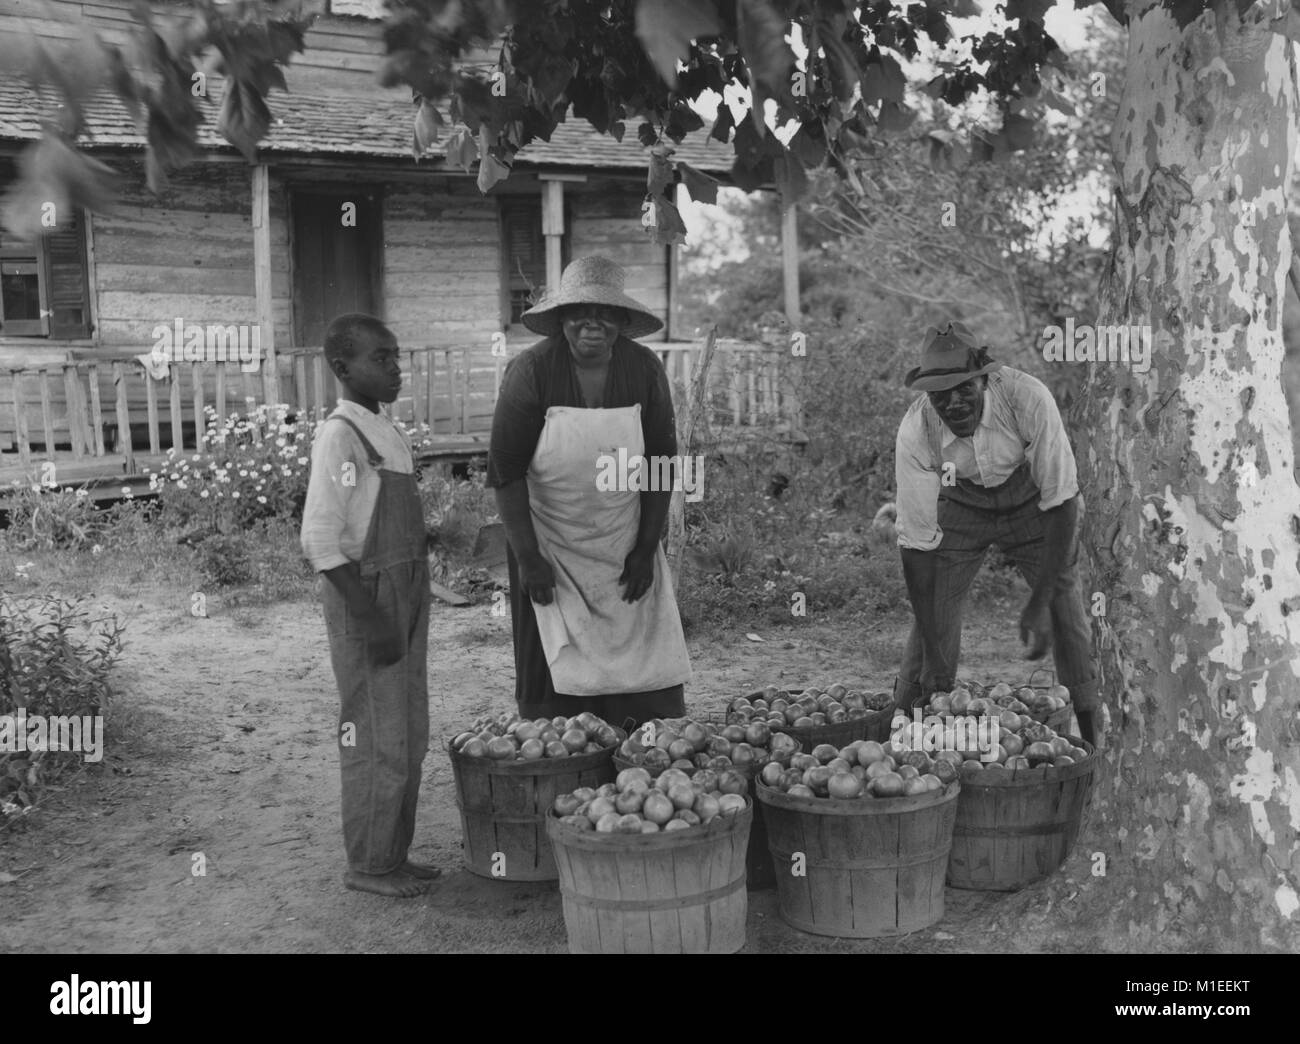 African-American family of farmers with containers filled with tomatoes standing in front of farmhouse, Beau Fort, South Carolina, USA, 1940. From the New York Public Library. () Stock Photo